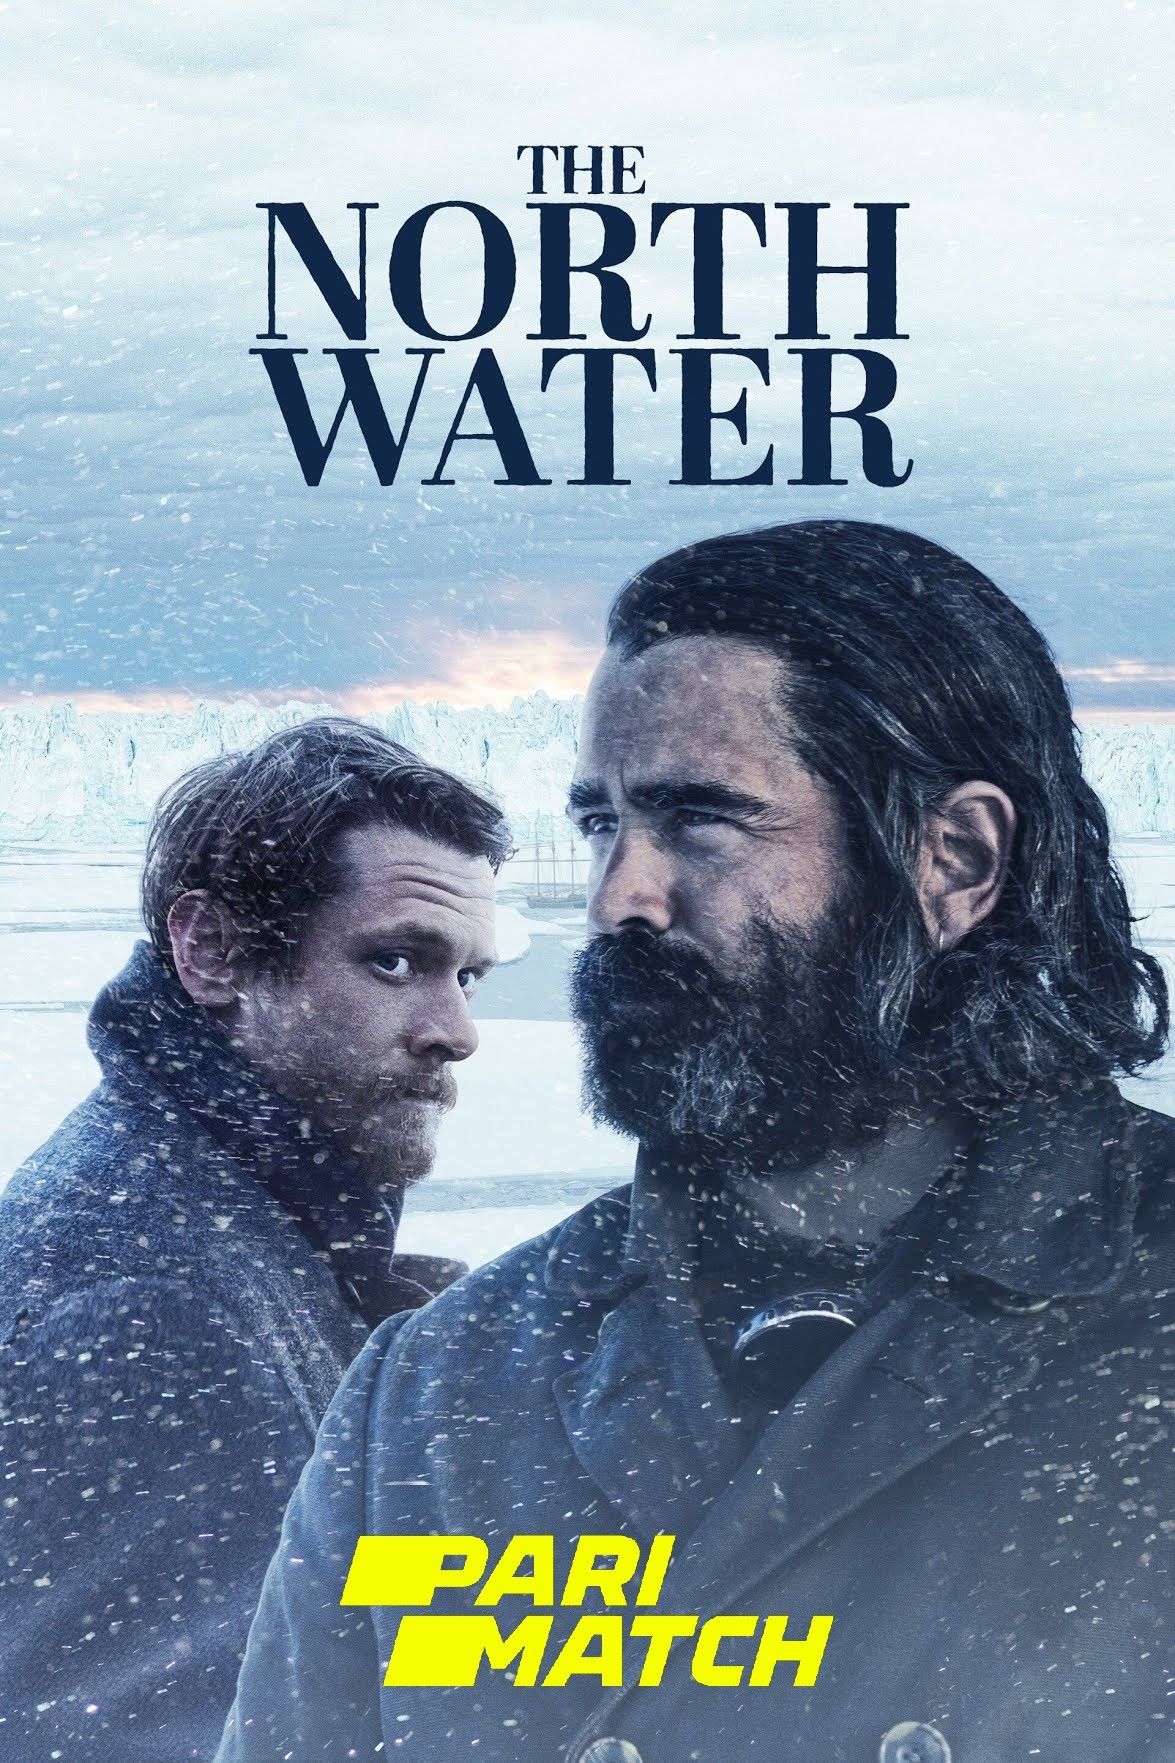 The North Water: Season 1 (2021) (Episode 5) Hindi (Voice Over) Dubbed TV Series download full movie